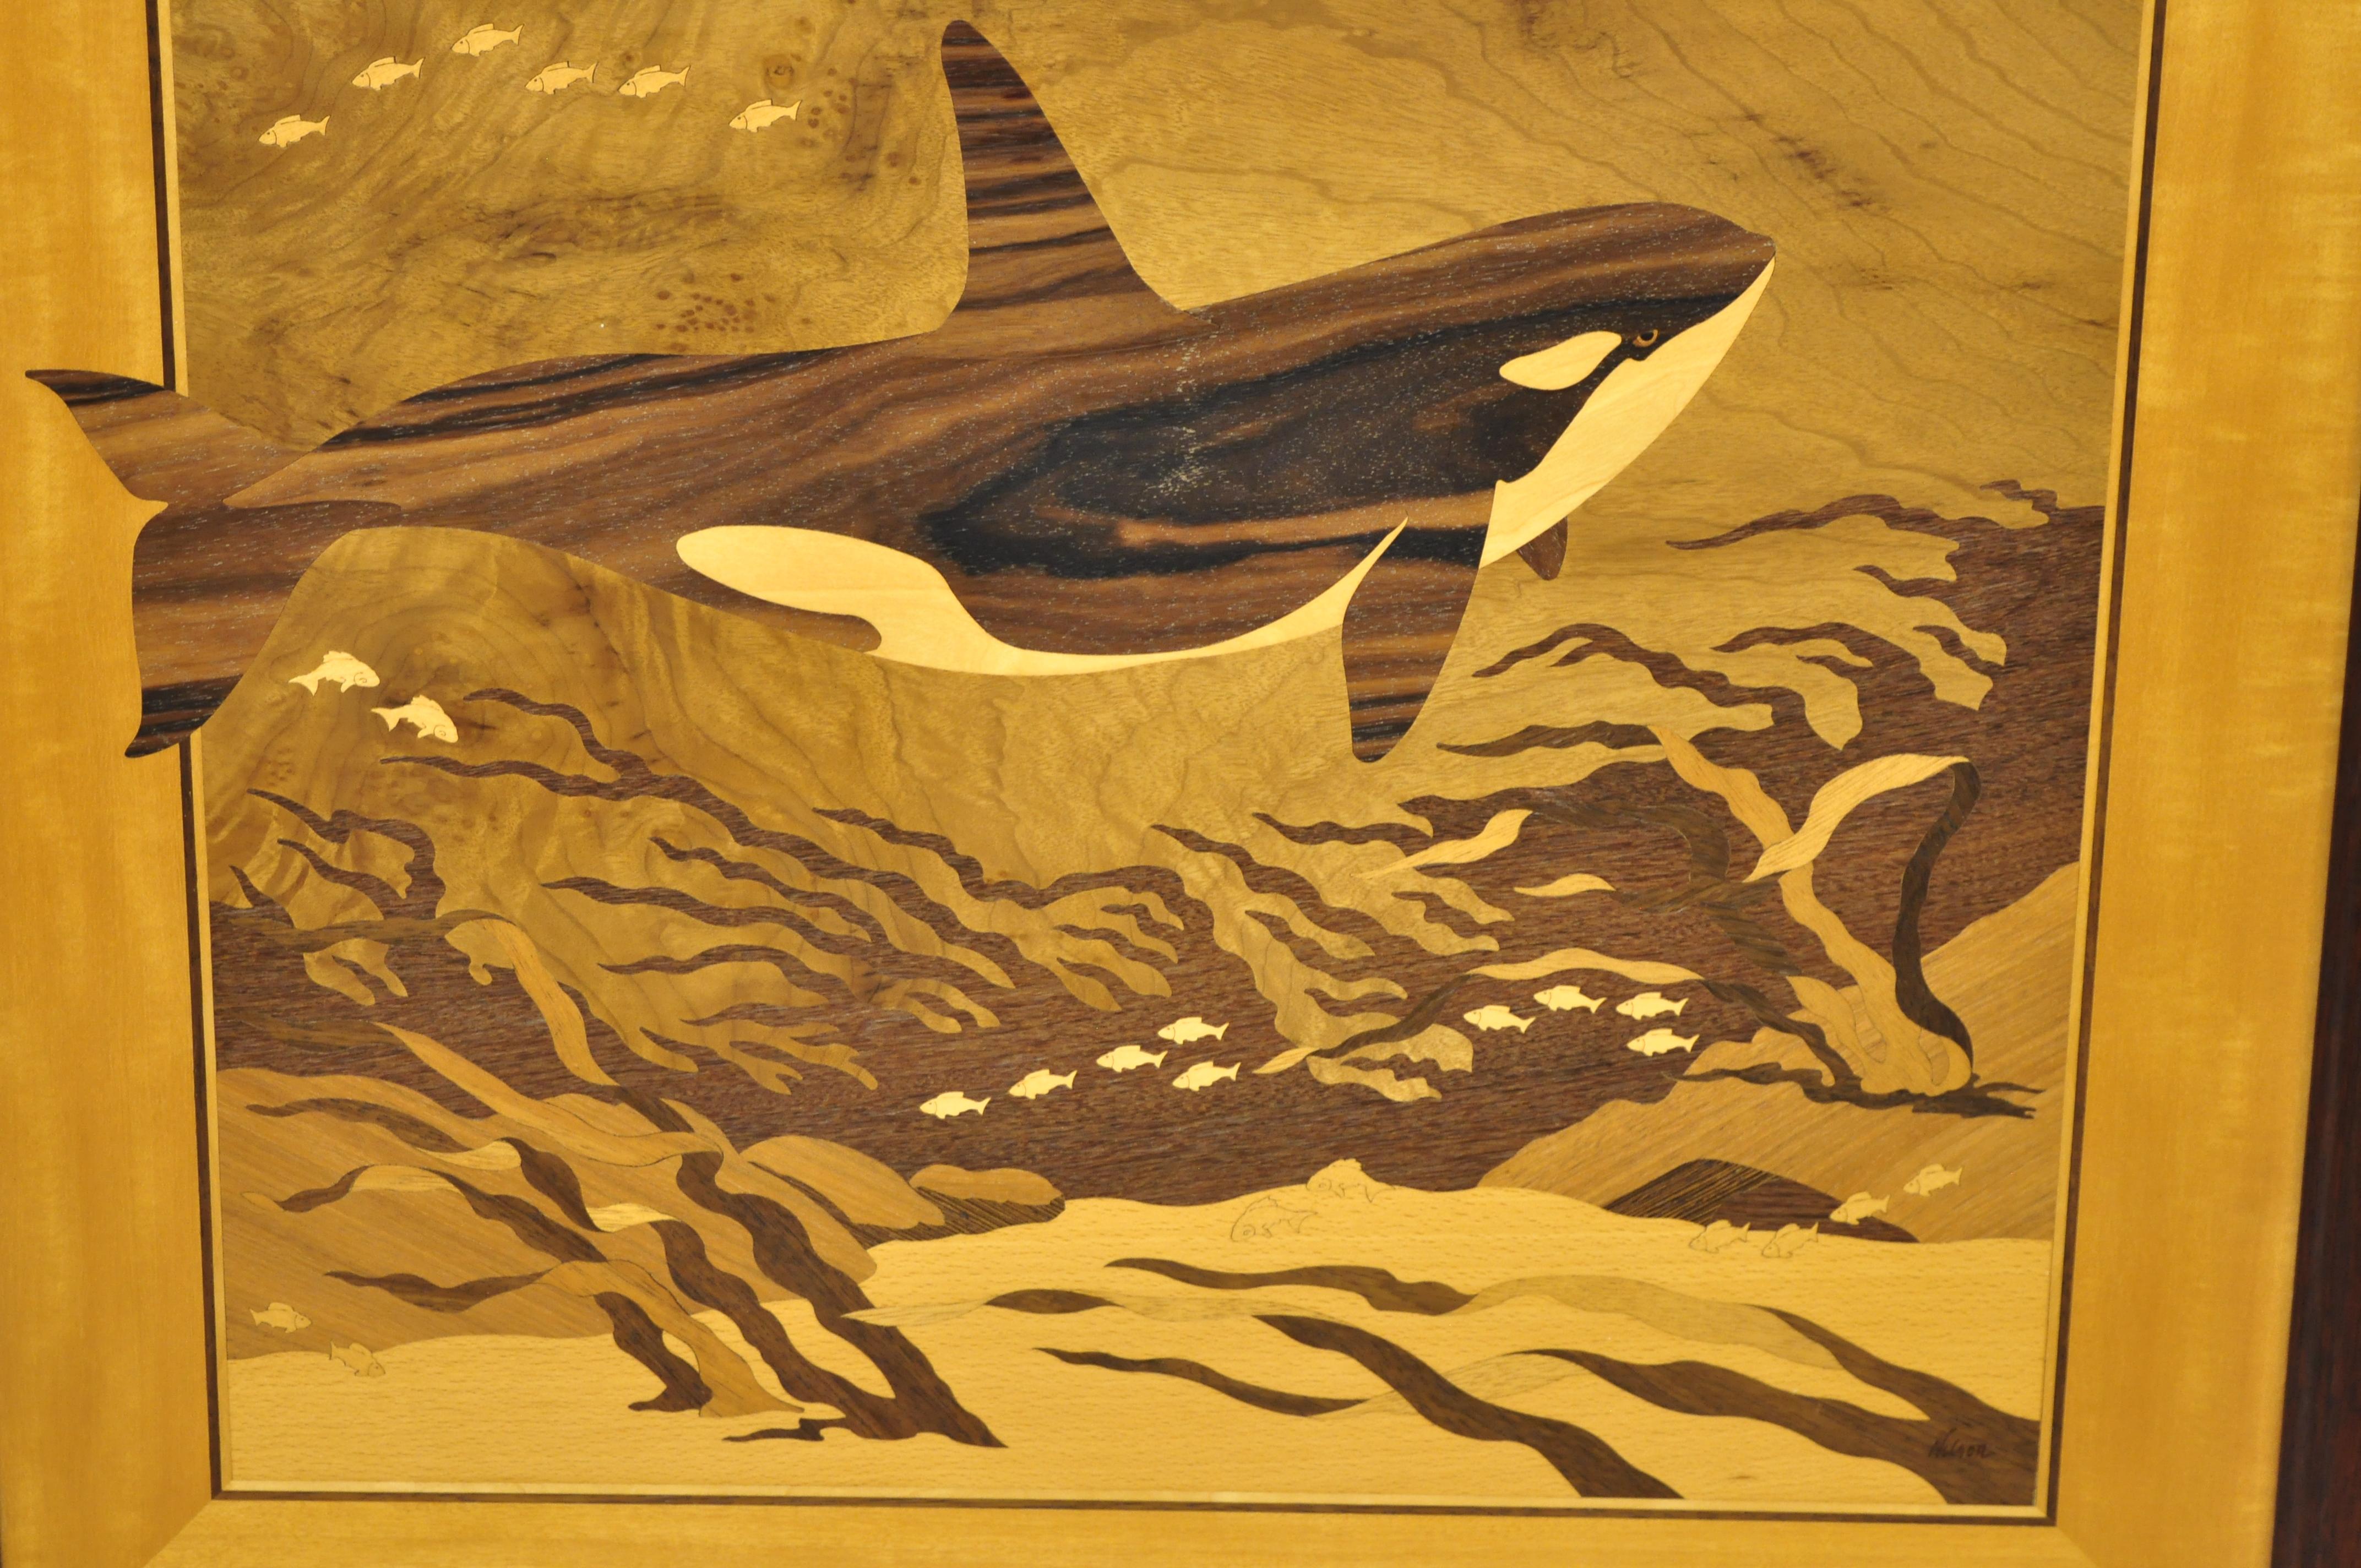 North American Hudson River Inlay Orcas Killer Whales Nature Sea Marquetry Inlaid Wall Artwork